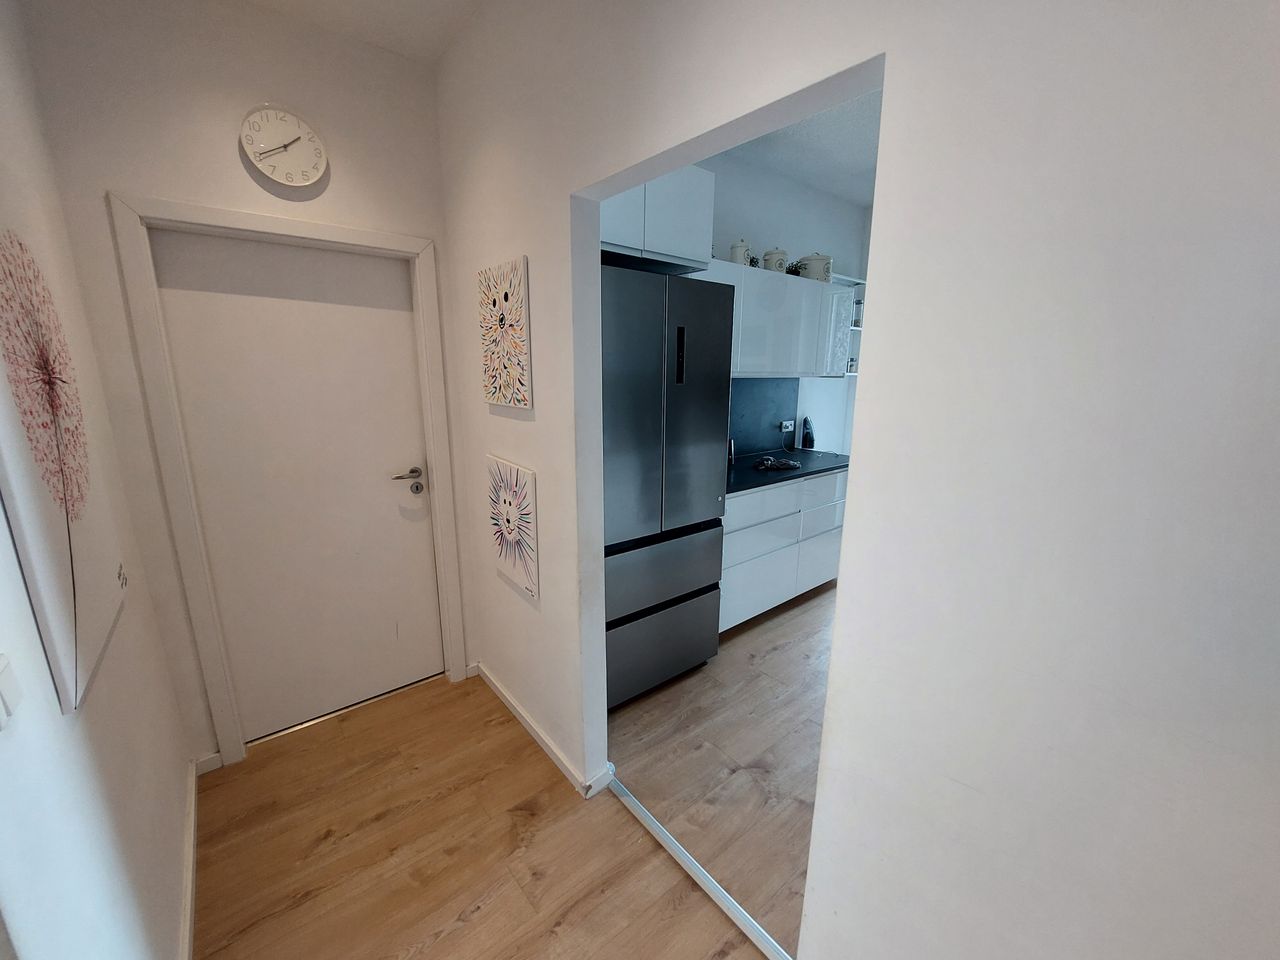 Stunning and fully furnished apartment in the heart of Düsseldorf